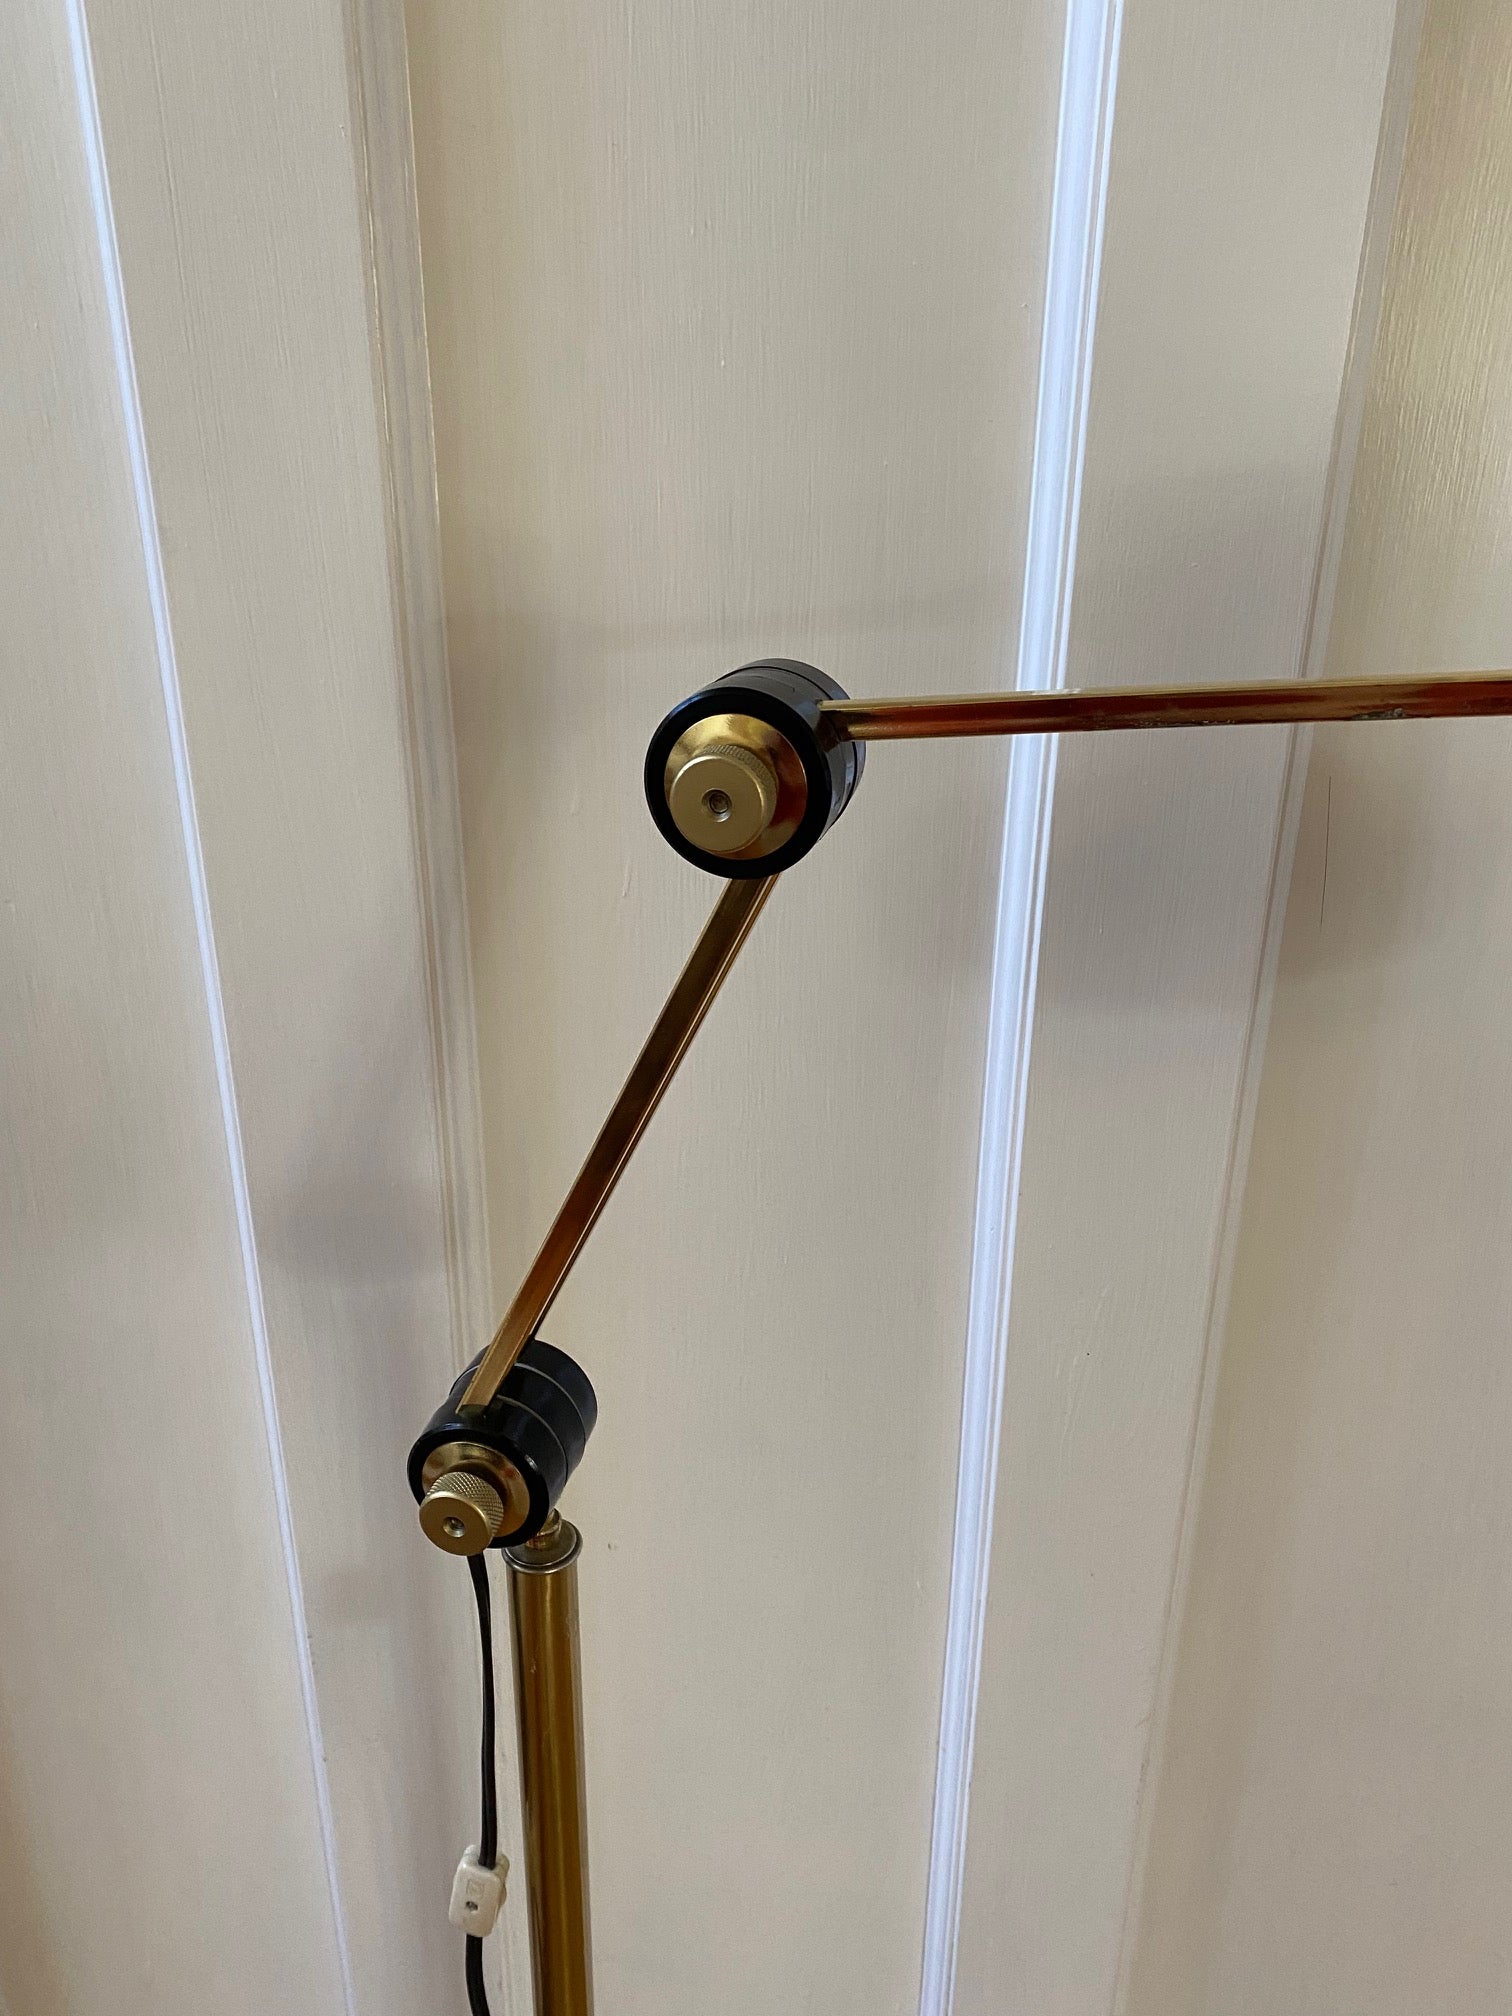 Mid-century brass floor lamp. Retro black knobs at mid-pole adjust height and direction of the lamp. Made by Ward.- Cook Street Vintage